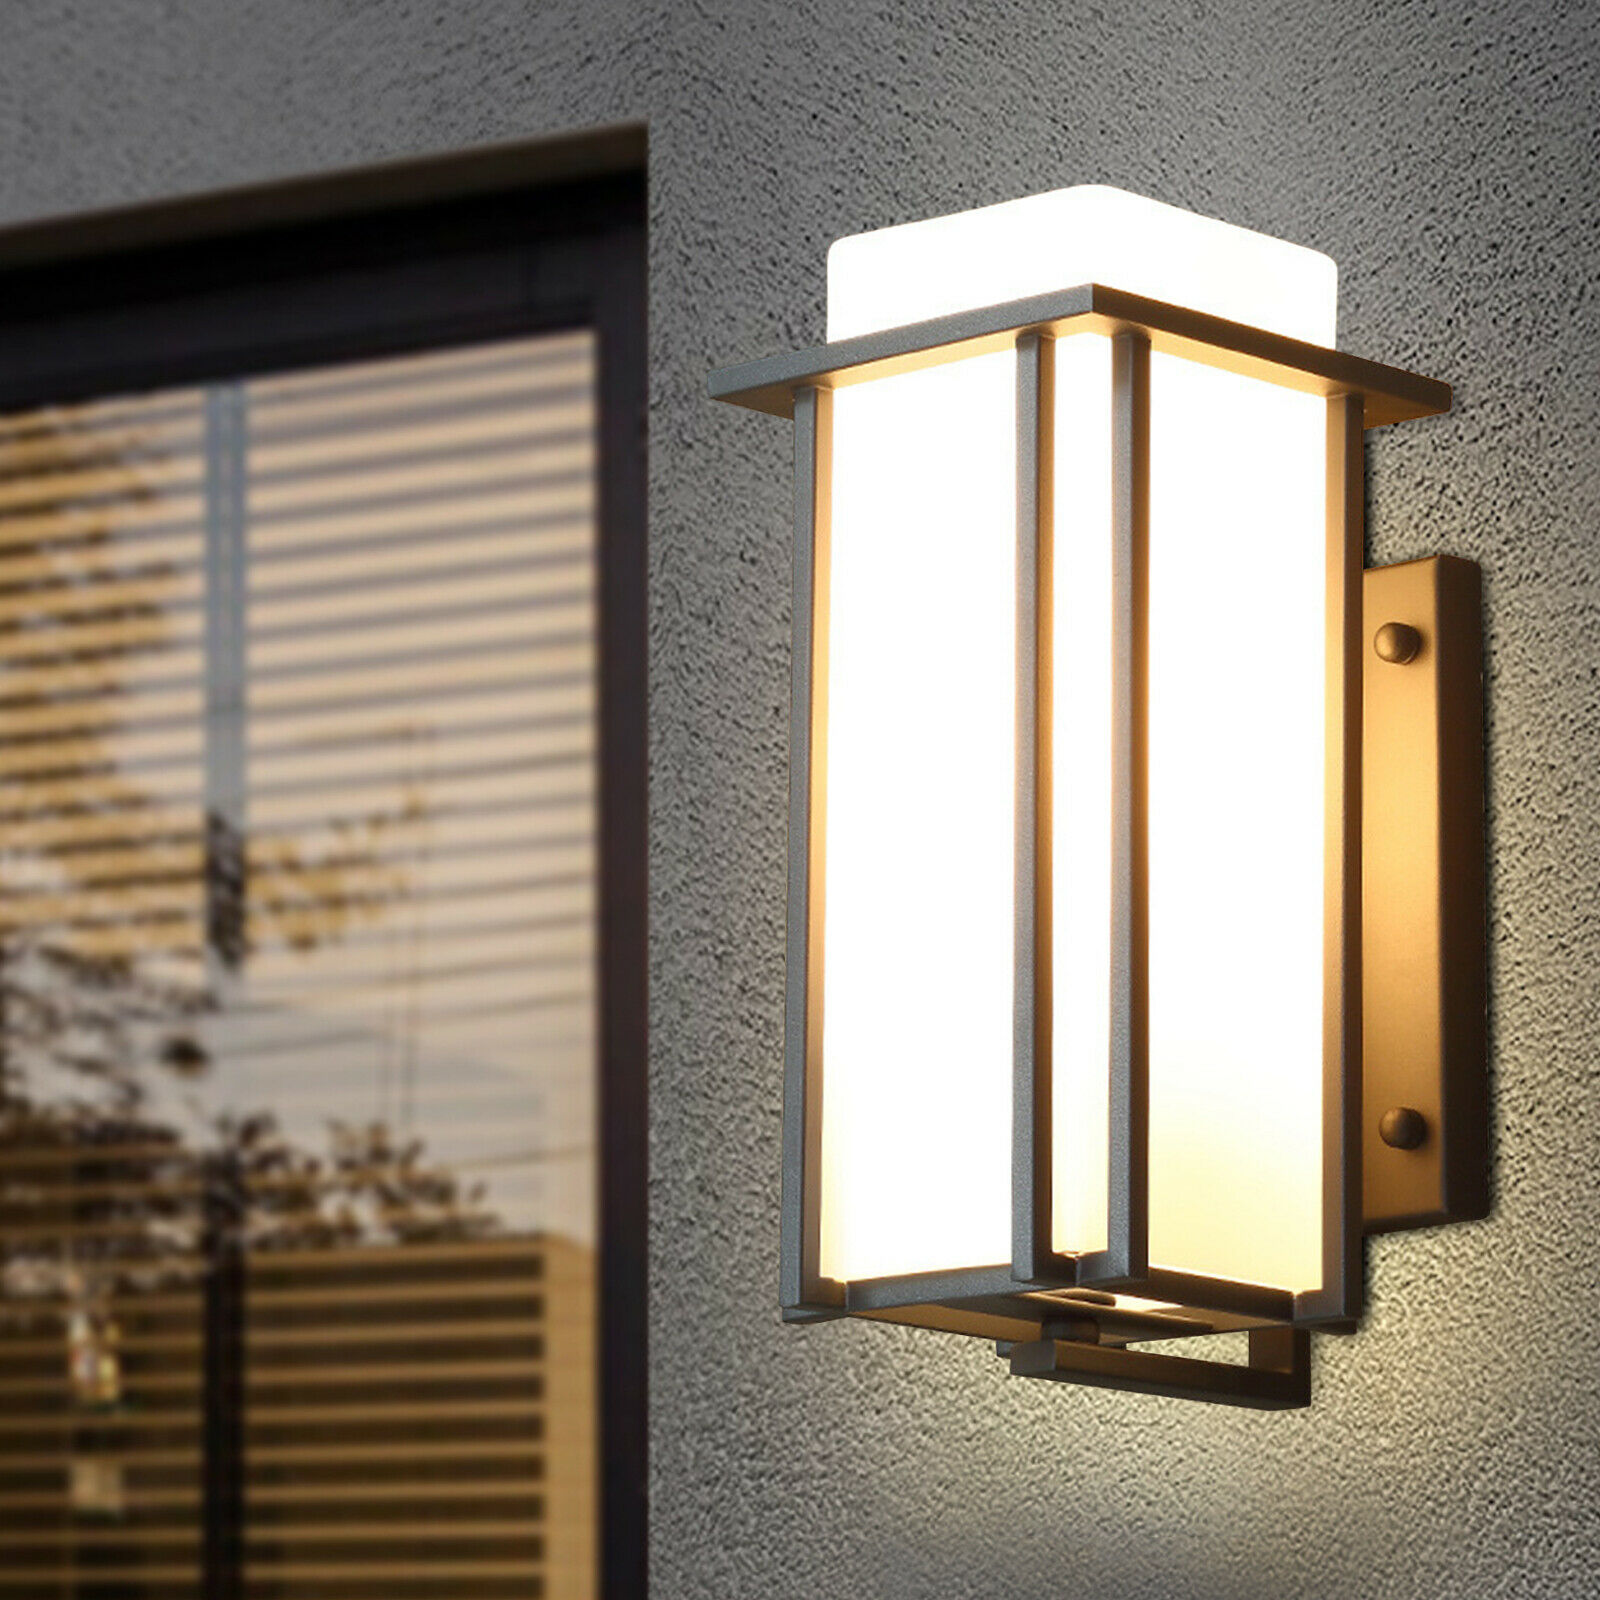 Outdoor Modern Light Wall Sconce Fixture Exterior Porch Waterproof Black LED Wall Light Waterproof Exterior Outdoor Porch Sconce Lamp Fixture Exterior Outdoor Wall Lantern Lighting Garden Wall Lamp - image 3 of 3